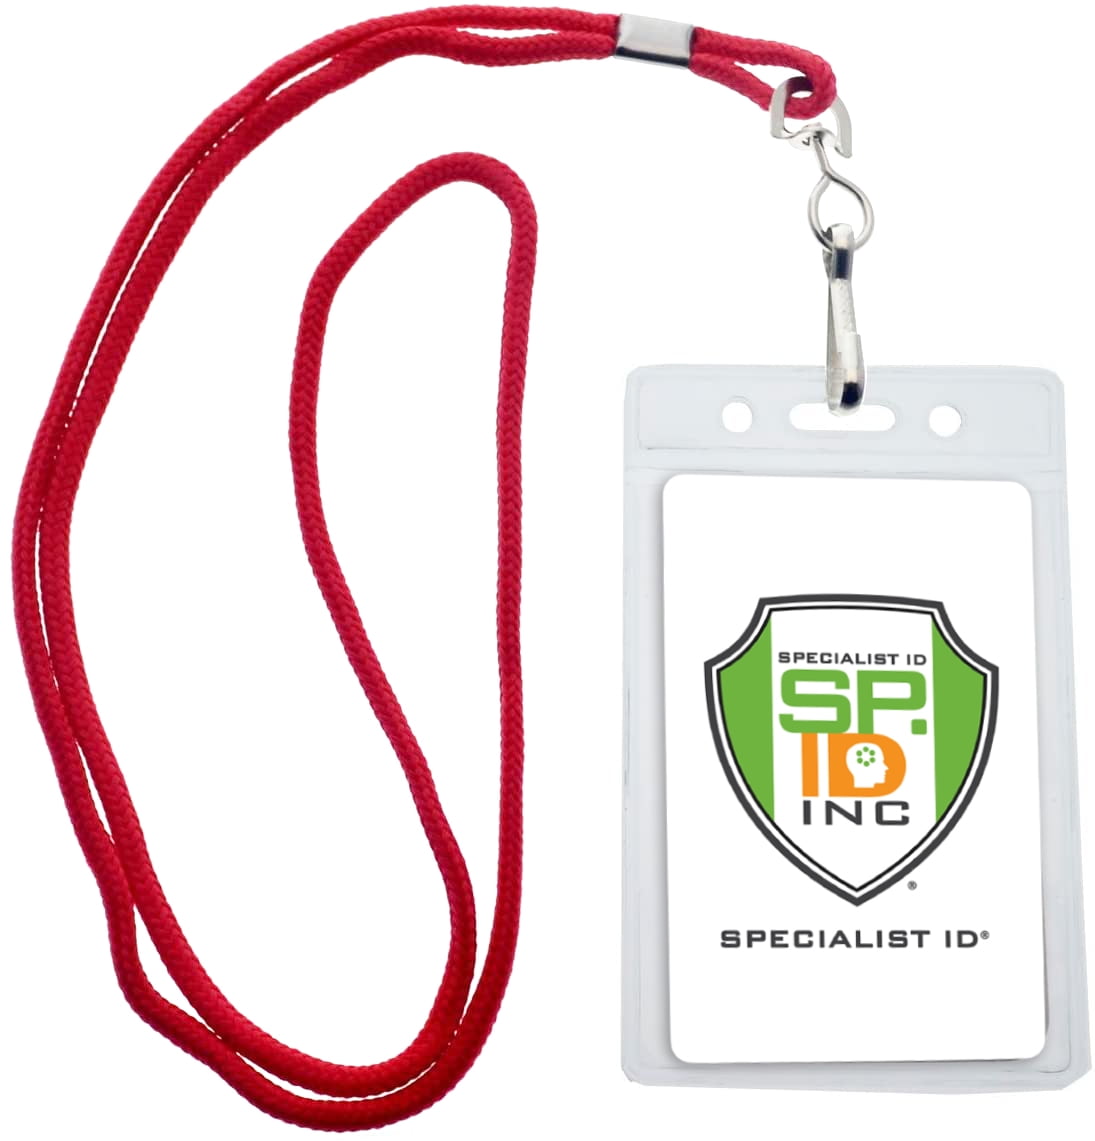 Details about   PVC Name Badge Tag ID Card Holder Employee Neck String Strap Lanyard Office 